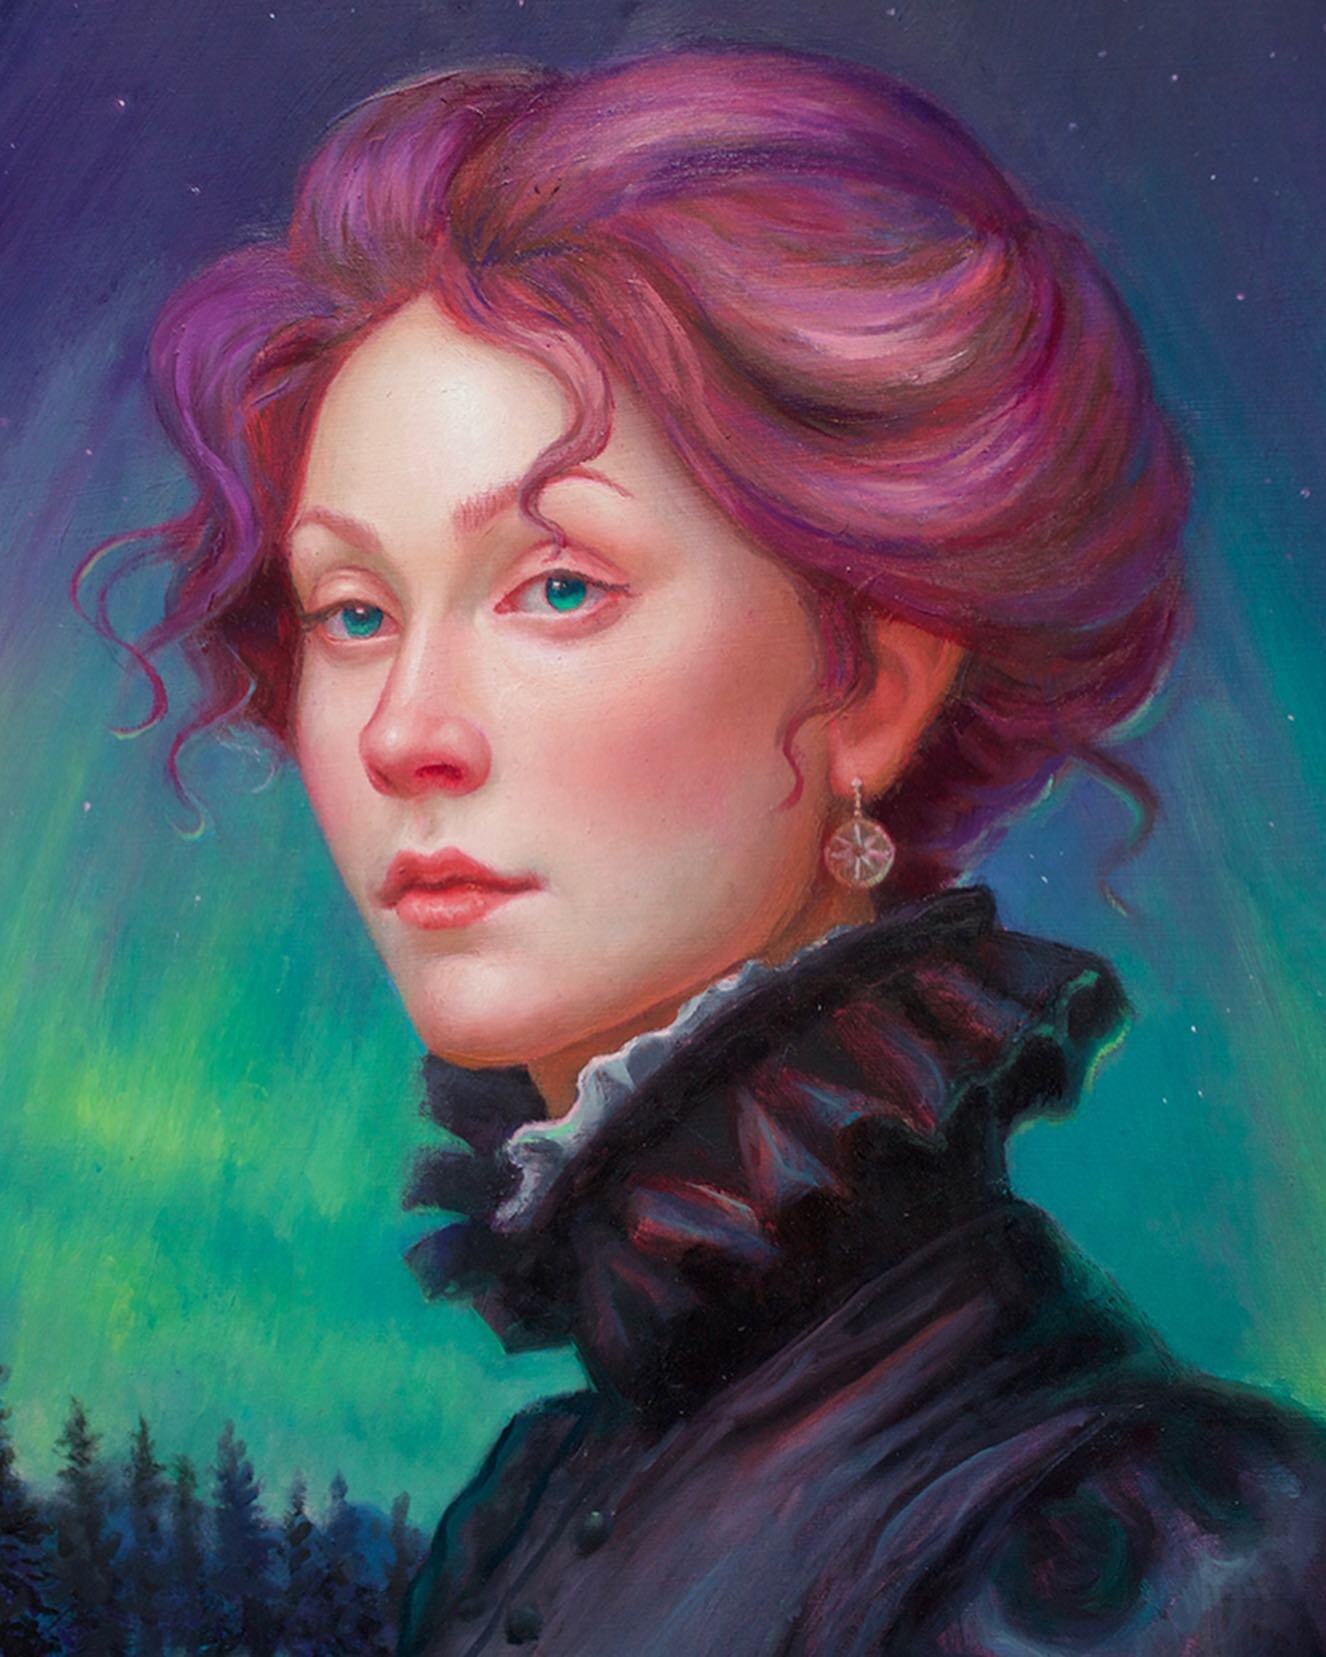 Decided to call this piece &ldquo;Polar Dawn&rdquo; her earring is a compass, indicating she is a fierce guide with the Polaris In her eyes, ready to help navigate the other through the frozen tundra of indecision 💖 The Boreal exhibition opens this 